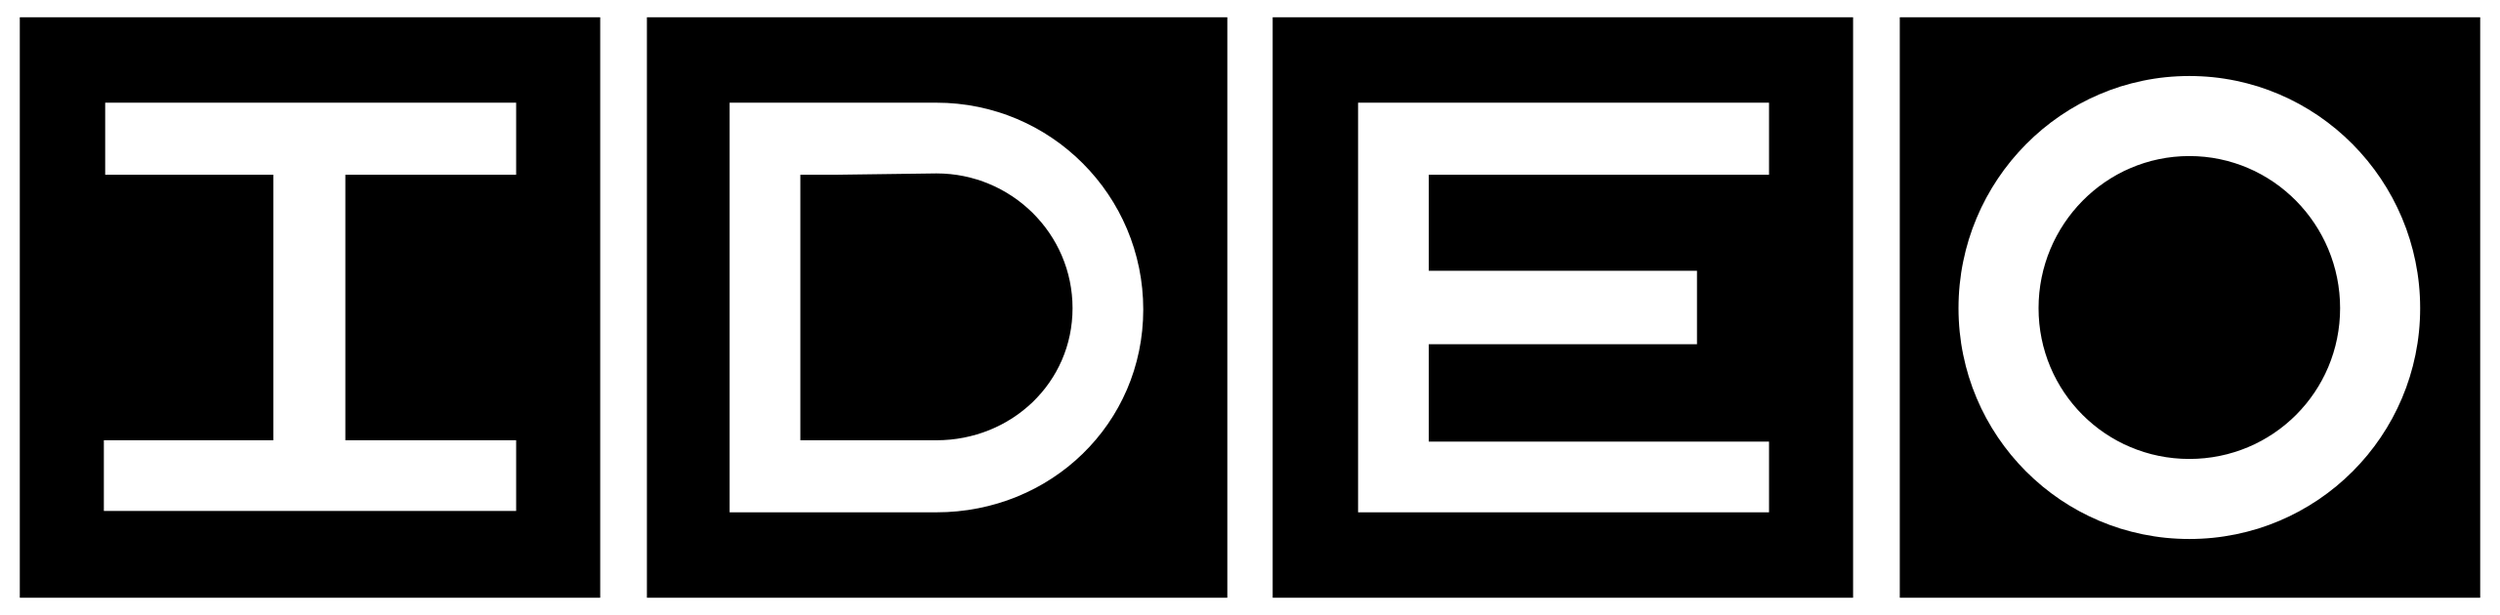 2560px-IDEO_logo.svg.png